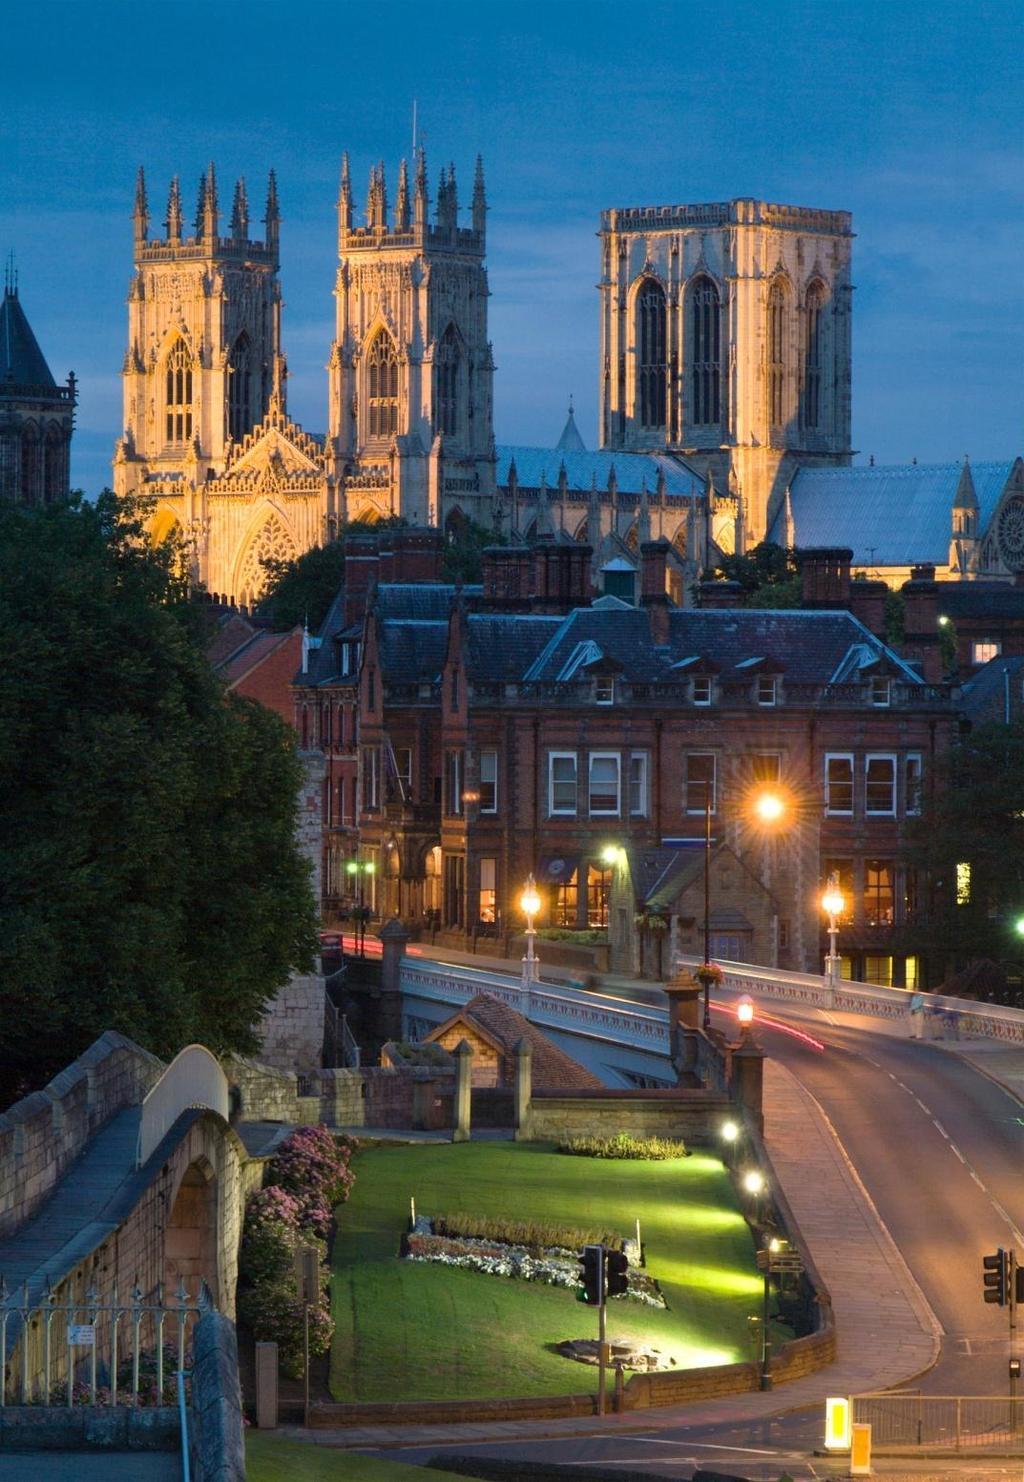 International Tourists and York: The Welcoming City